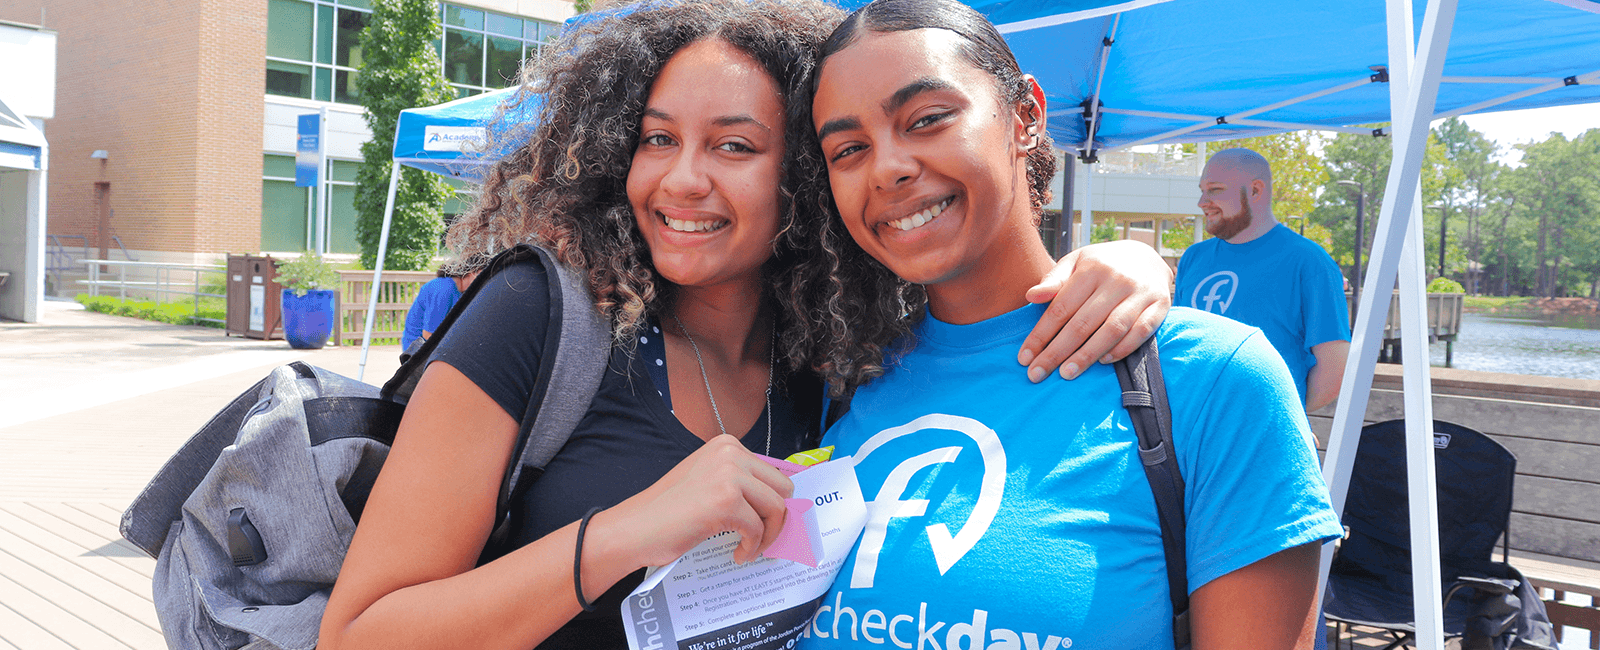 two residents at fresh check day event